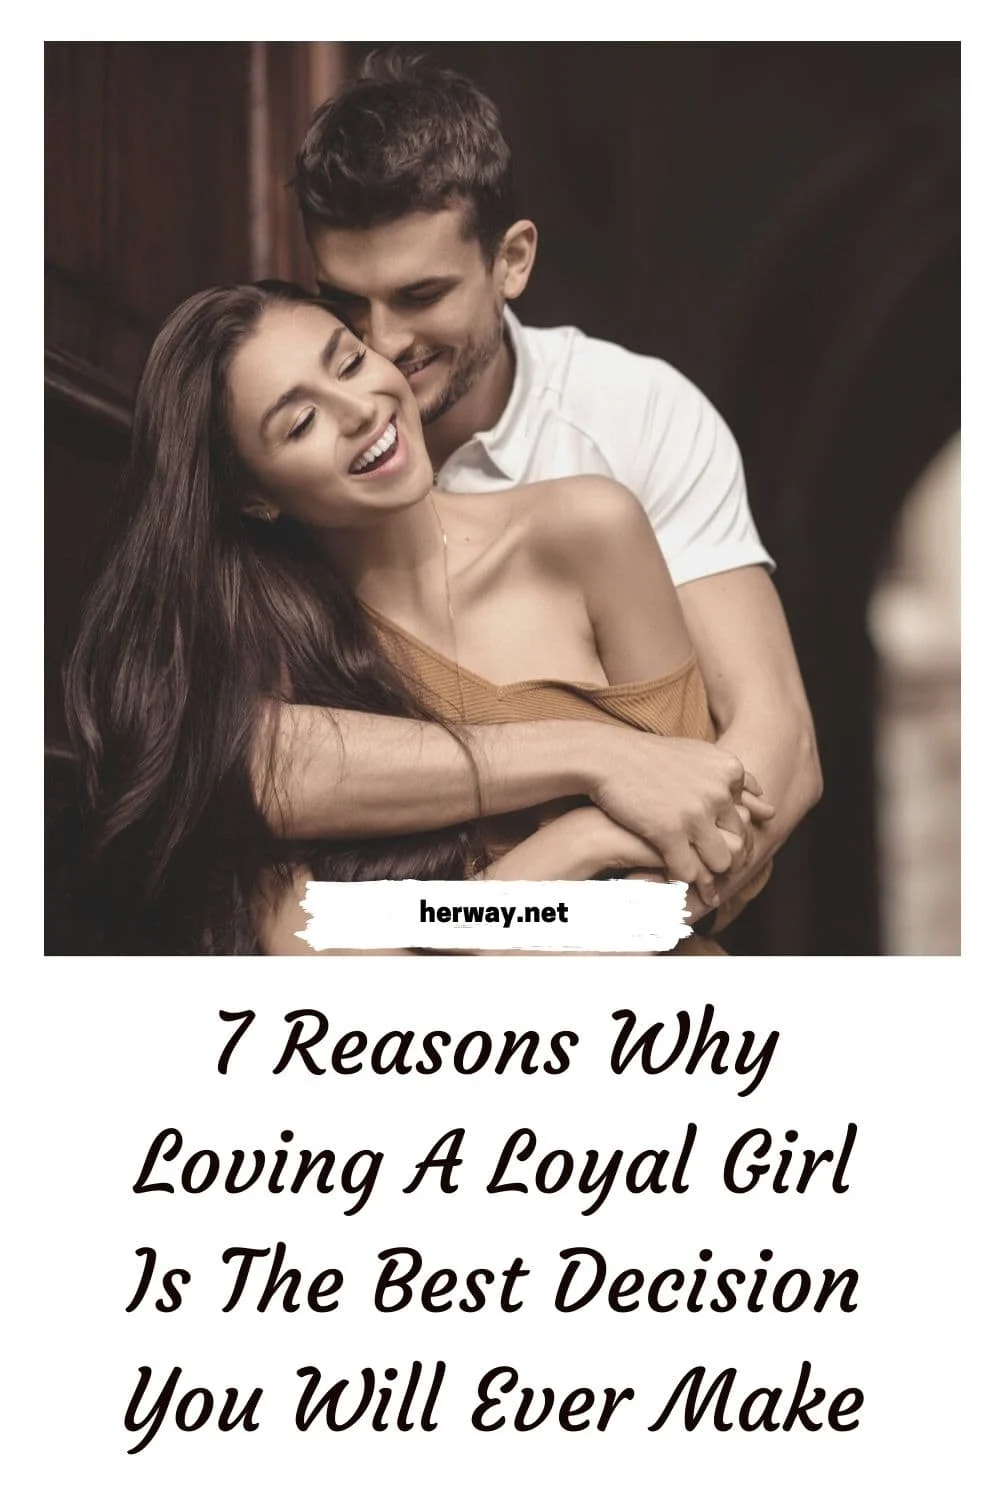 7 Reasons Why Loving A Loyal Girl Is The Best Decision You Will Ever Make